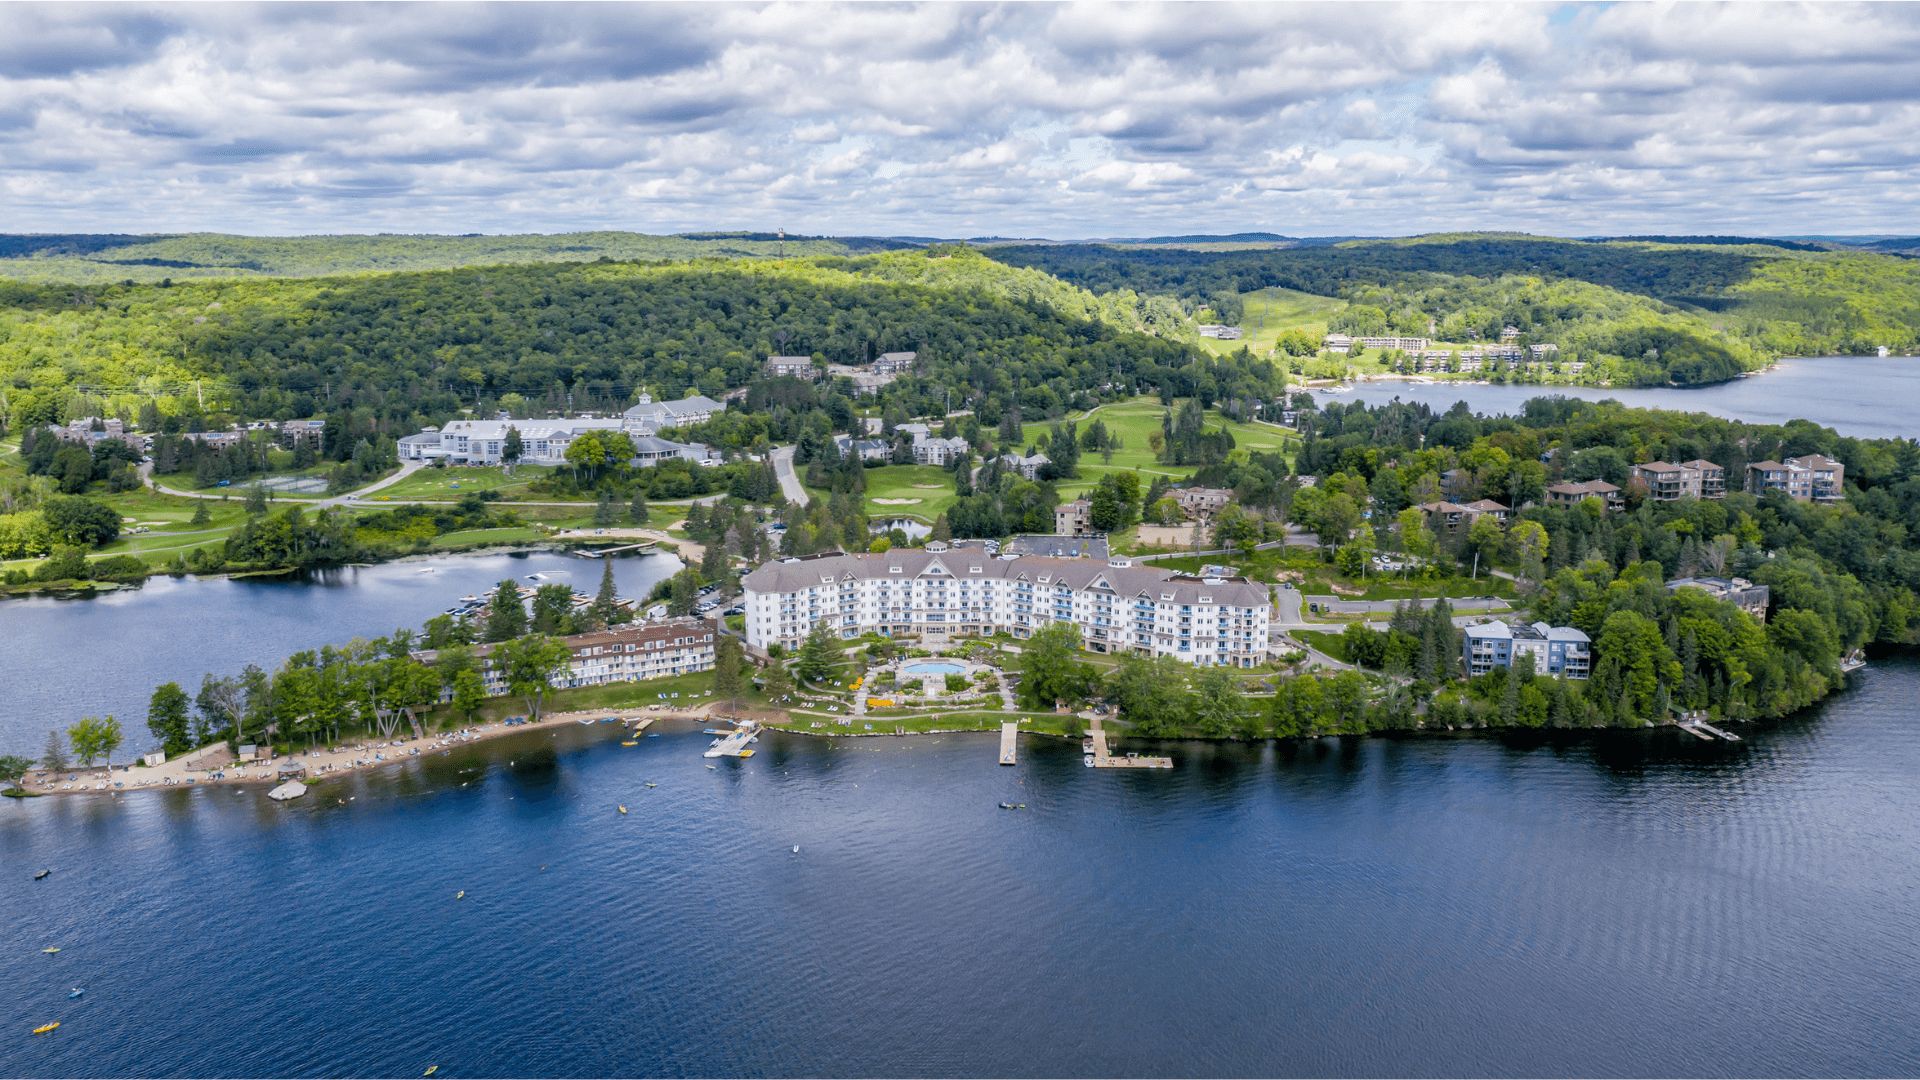 An aerial view over the lake and grounds at Deerhurst Resort